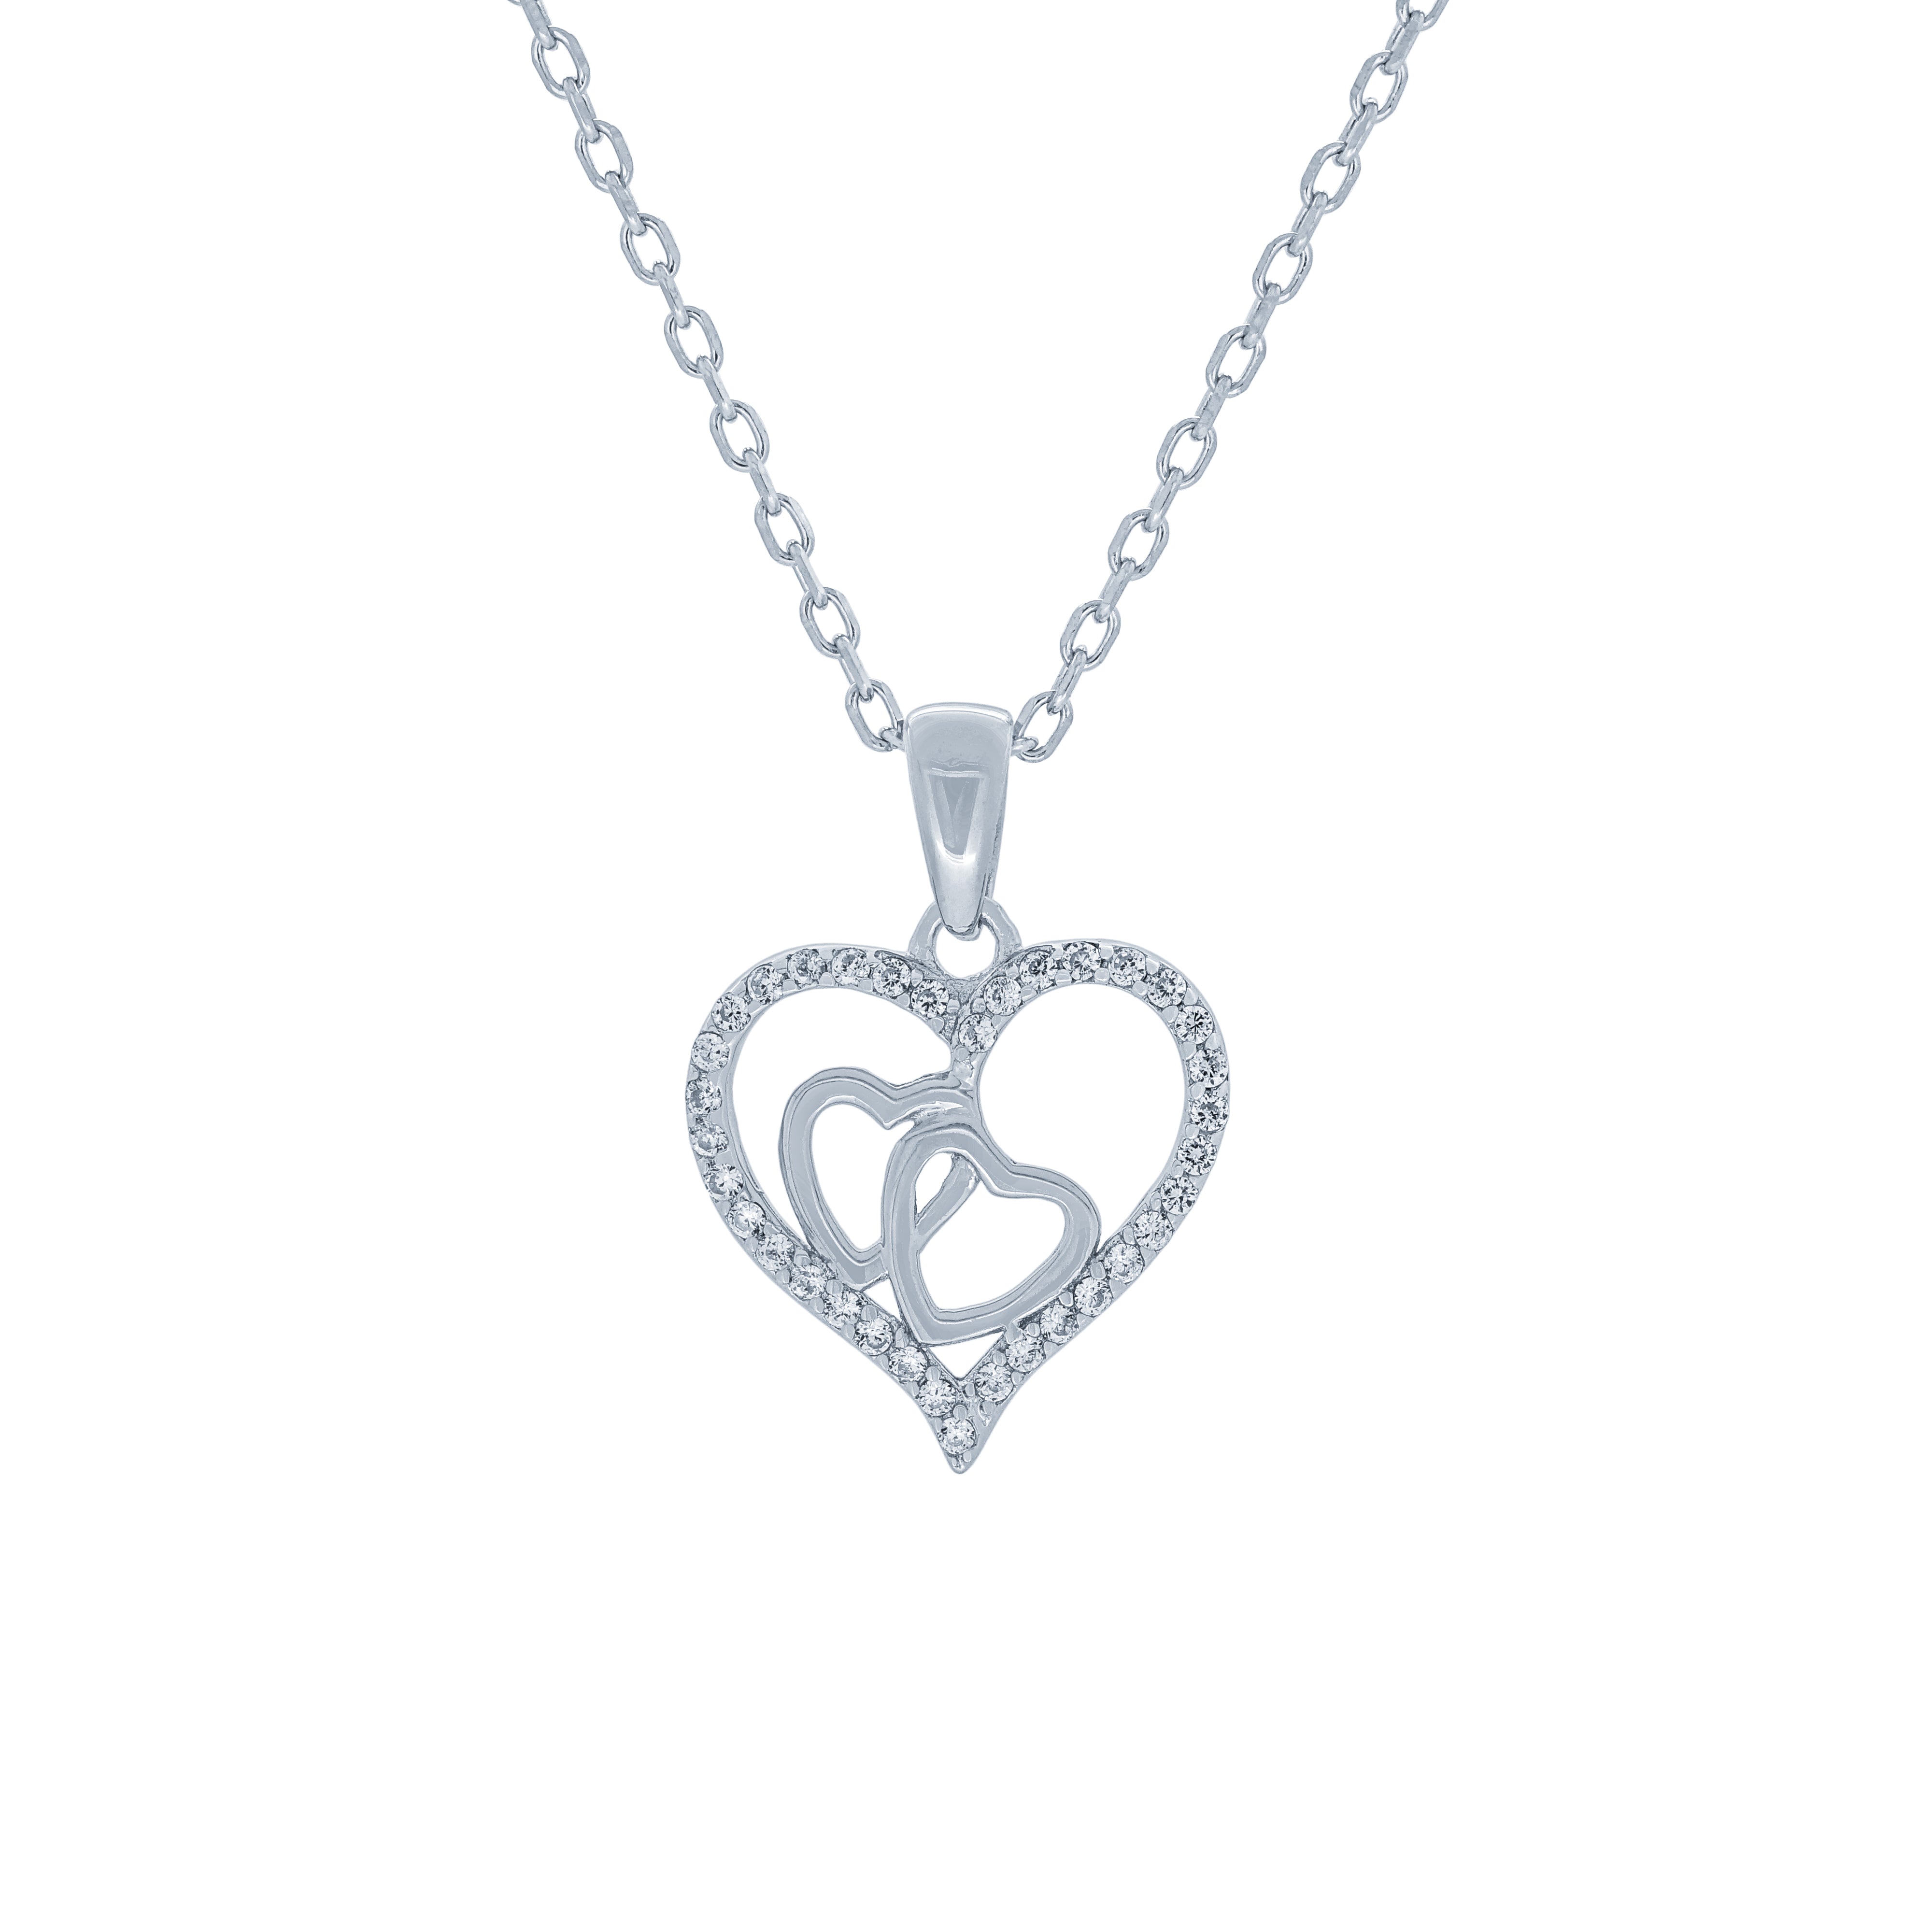 (100144) White Cubic Zirconia Heart Pendant Necklace In Sterling Silver